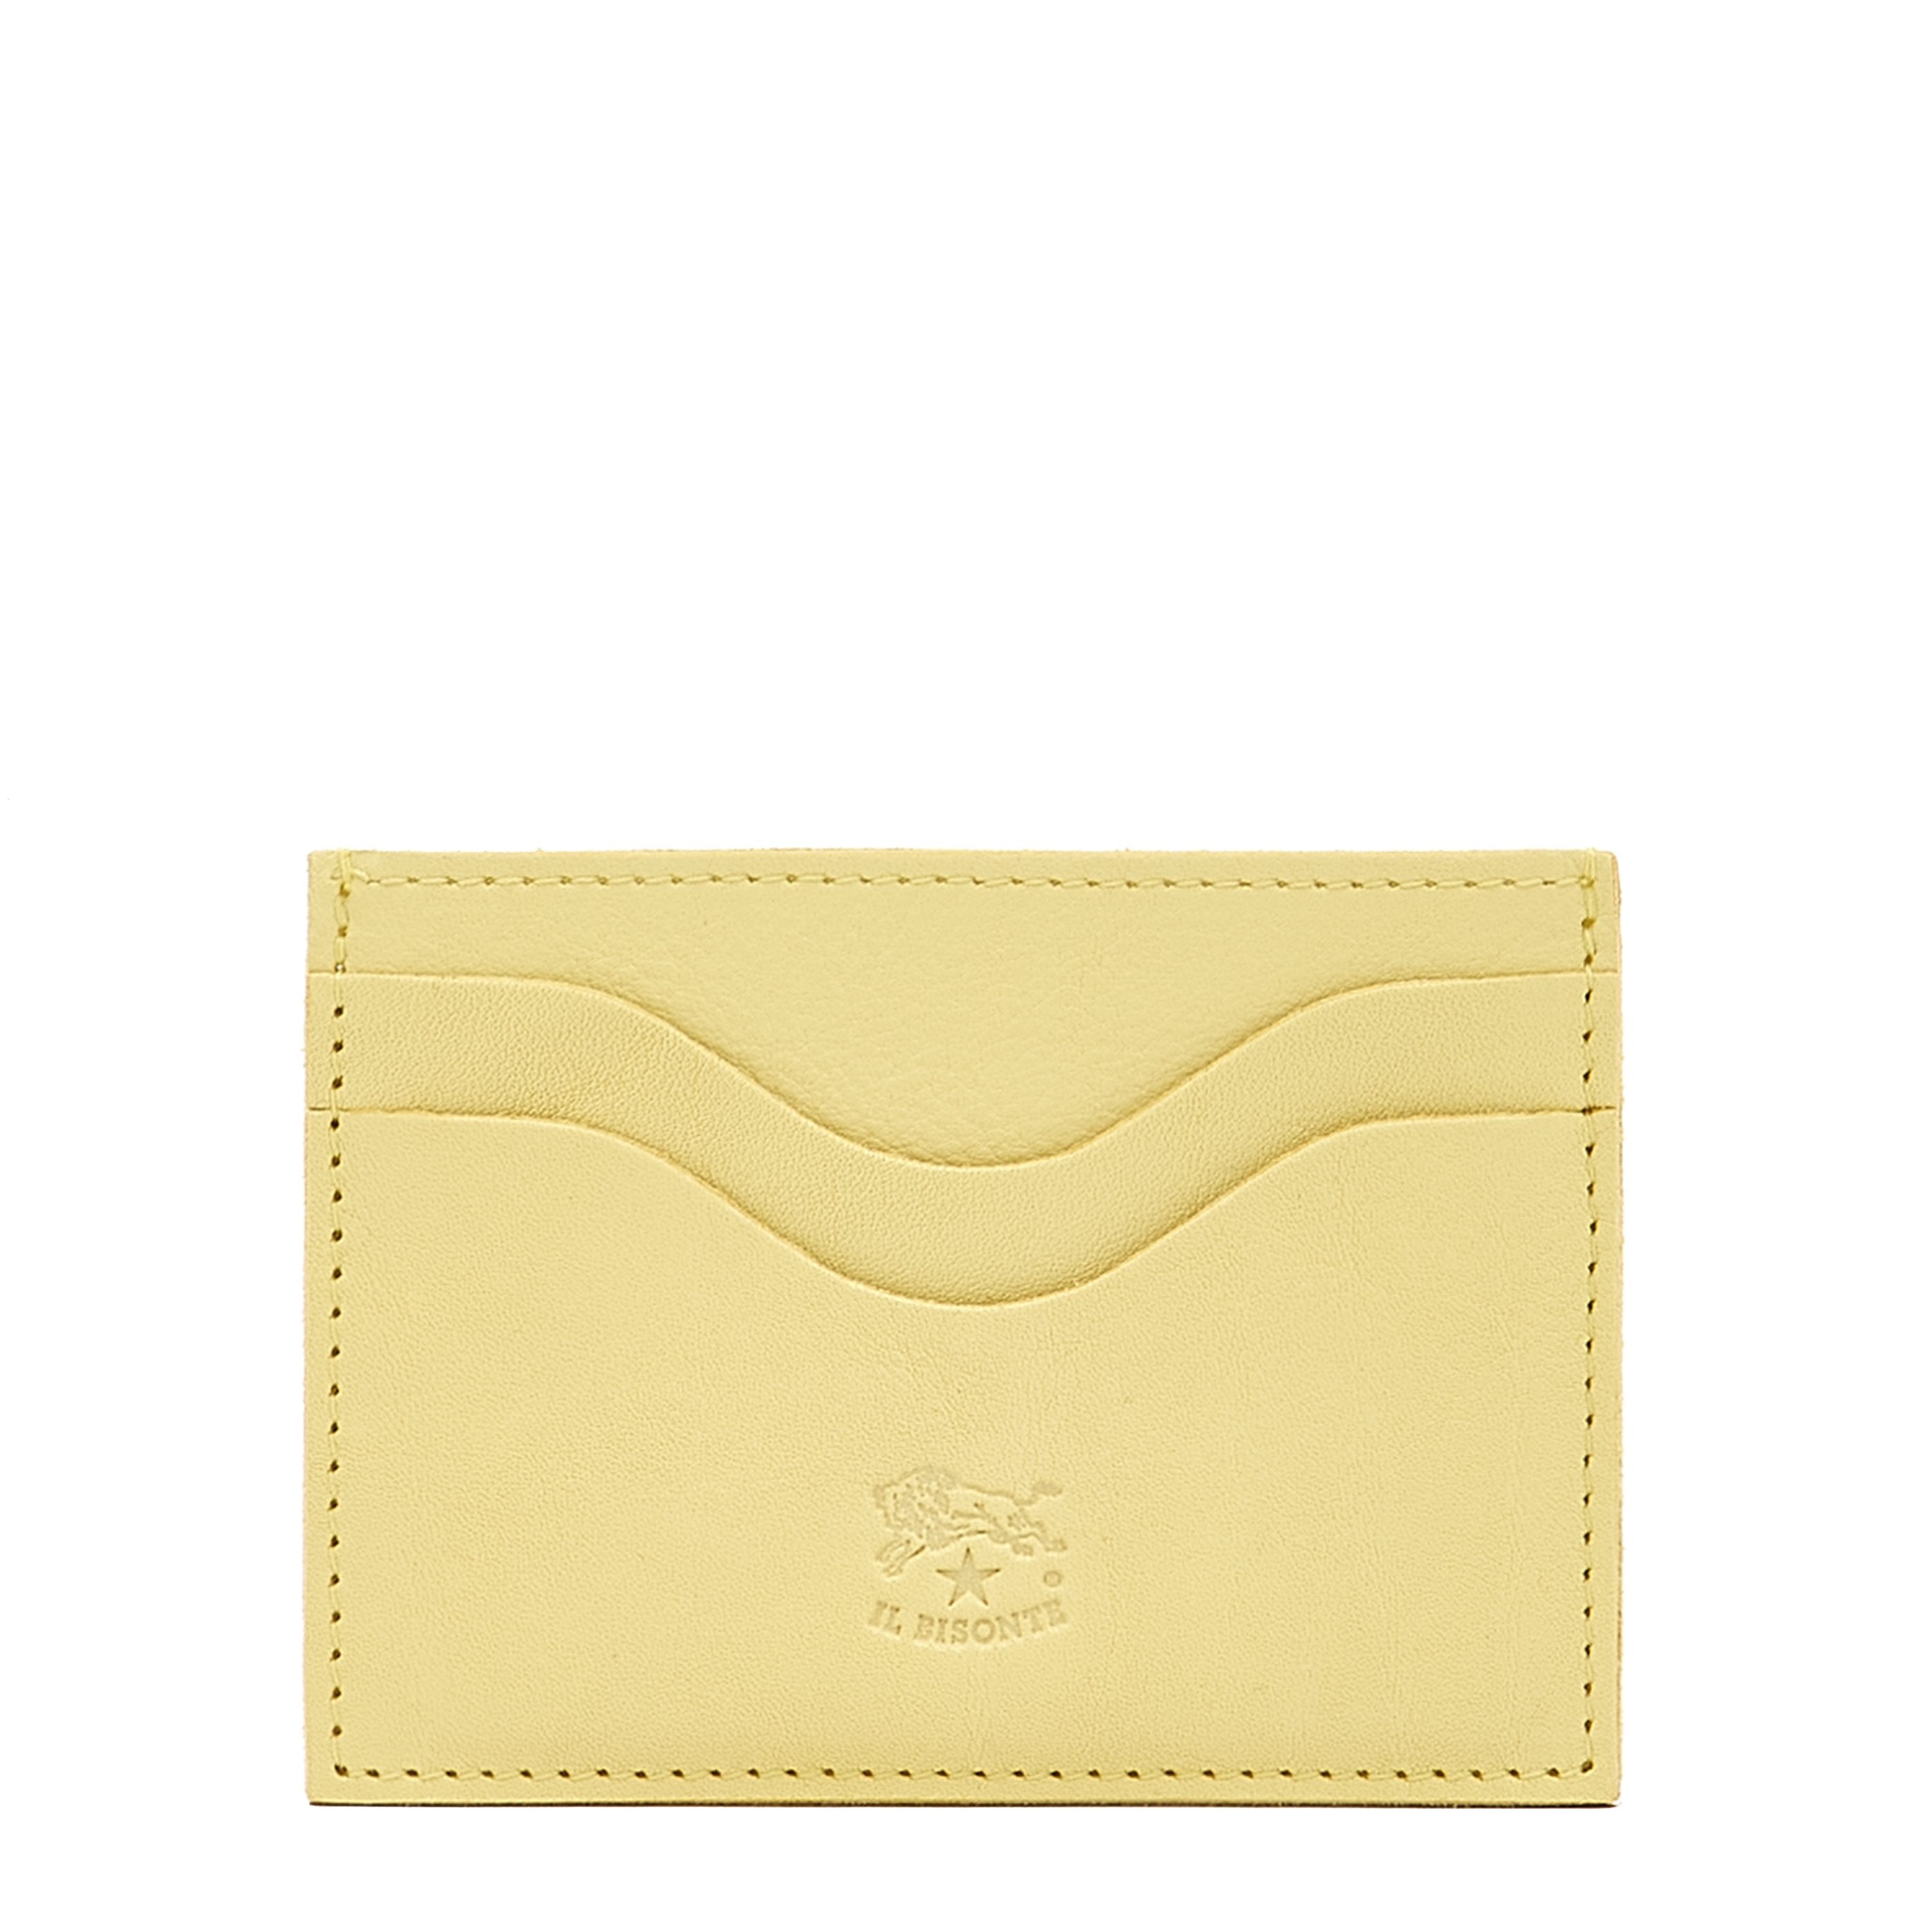 Salina | Card case in leather color mimosa